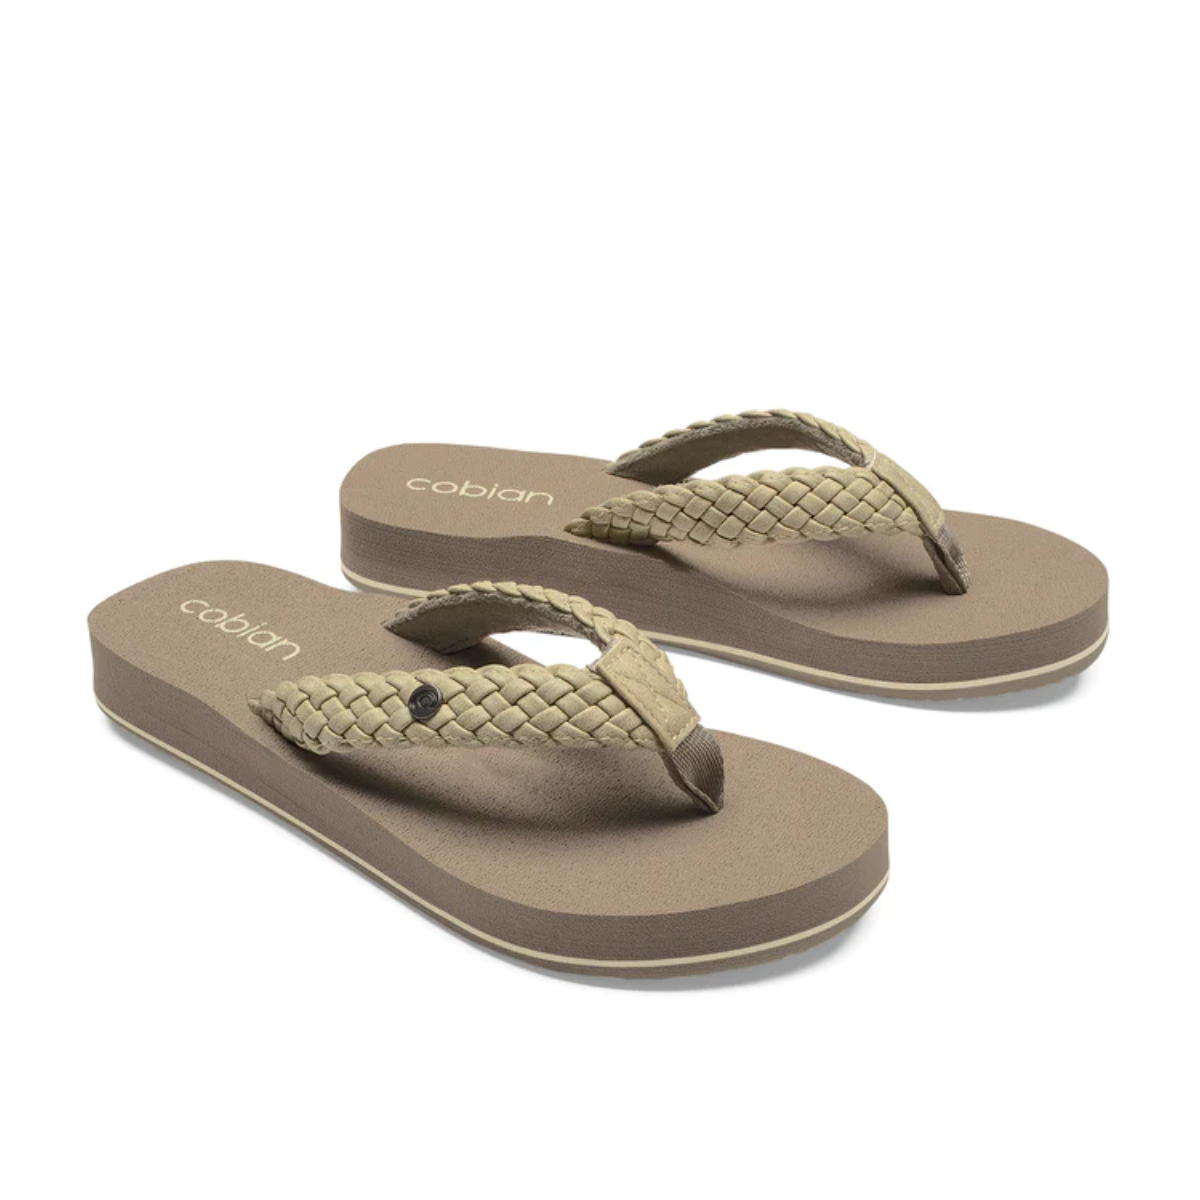 A pair of women's tan COBIAN Braided Bounce flip flops on a white background, providing comfort and arch support.